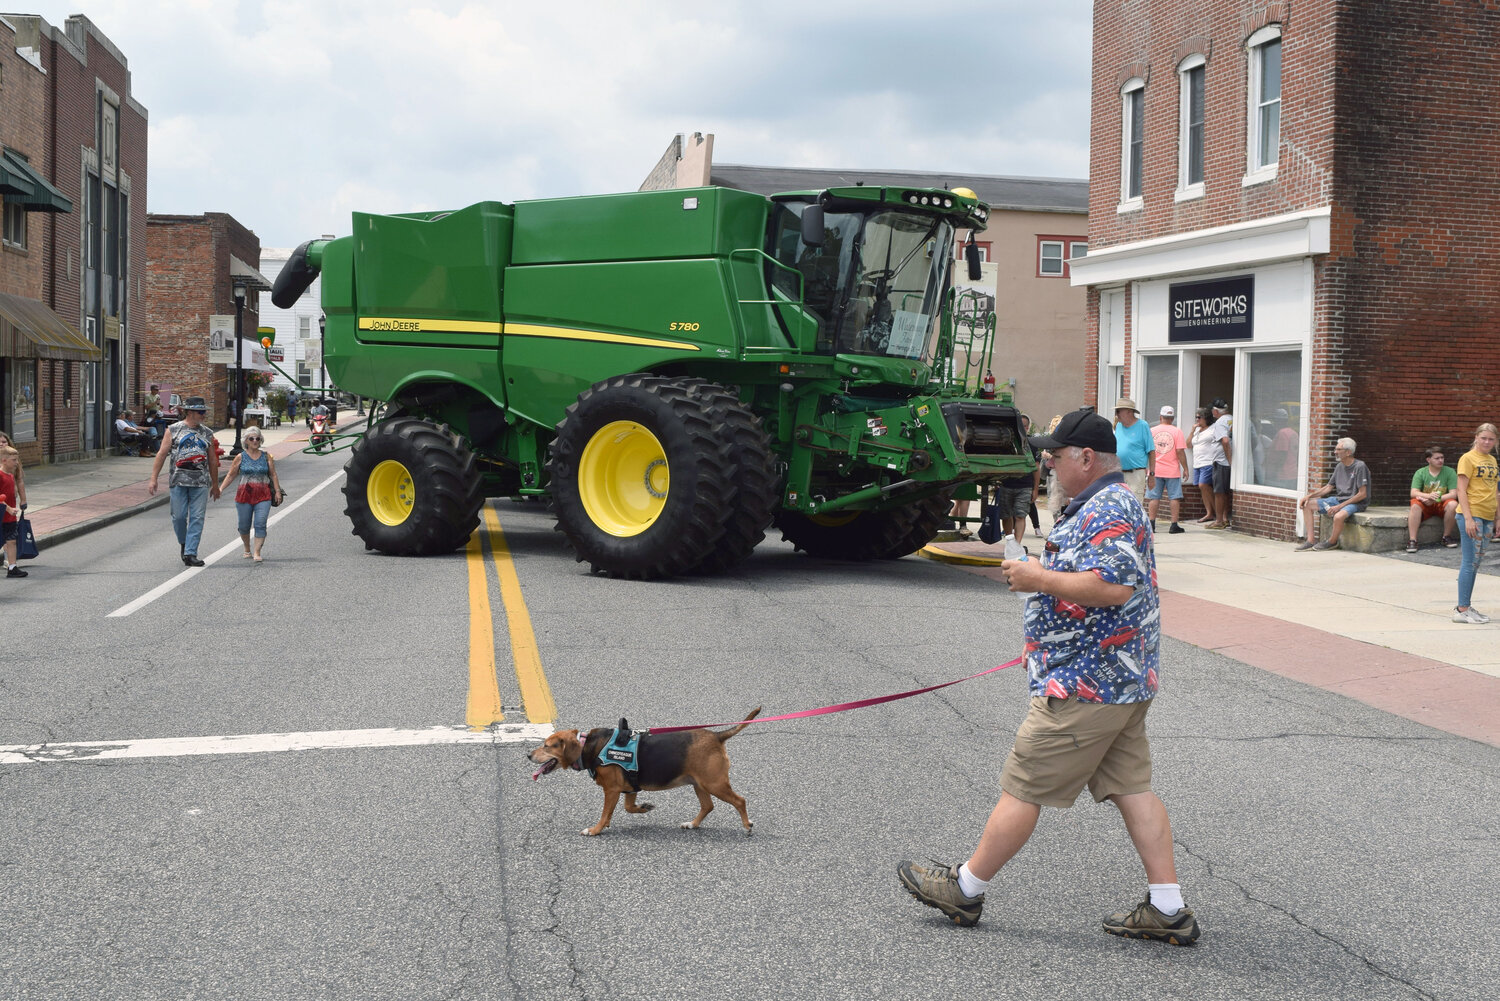 Examples of farm machinery were in downtown Harrington on Saturday for the town's heritage festival.